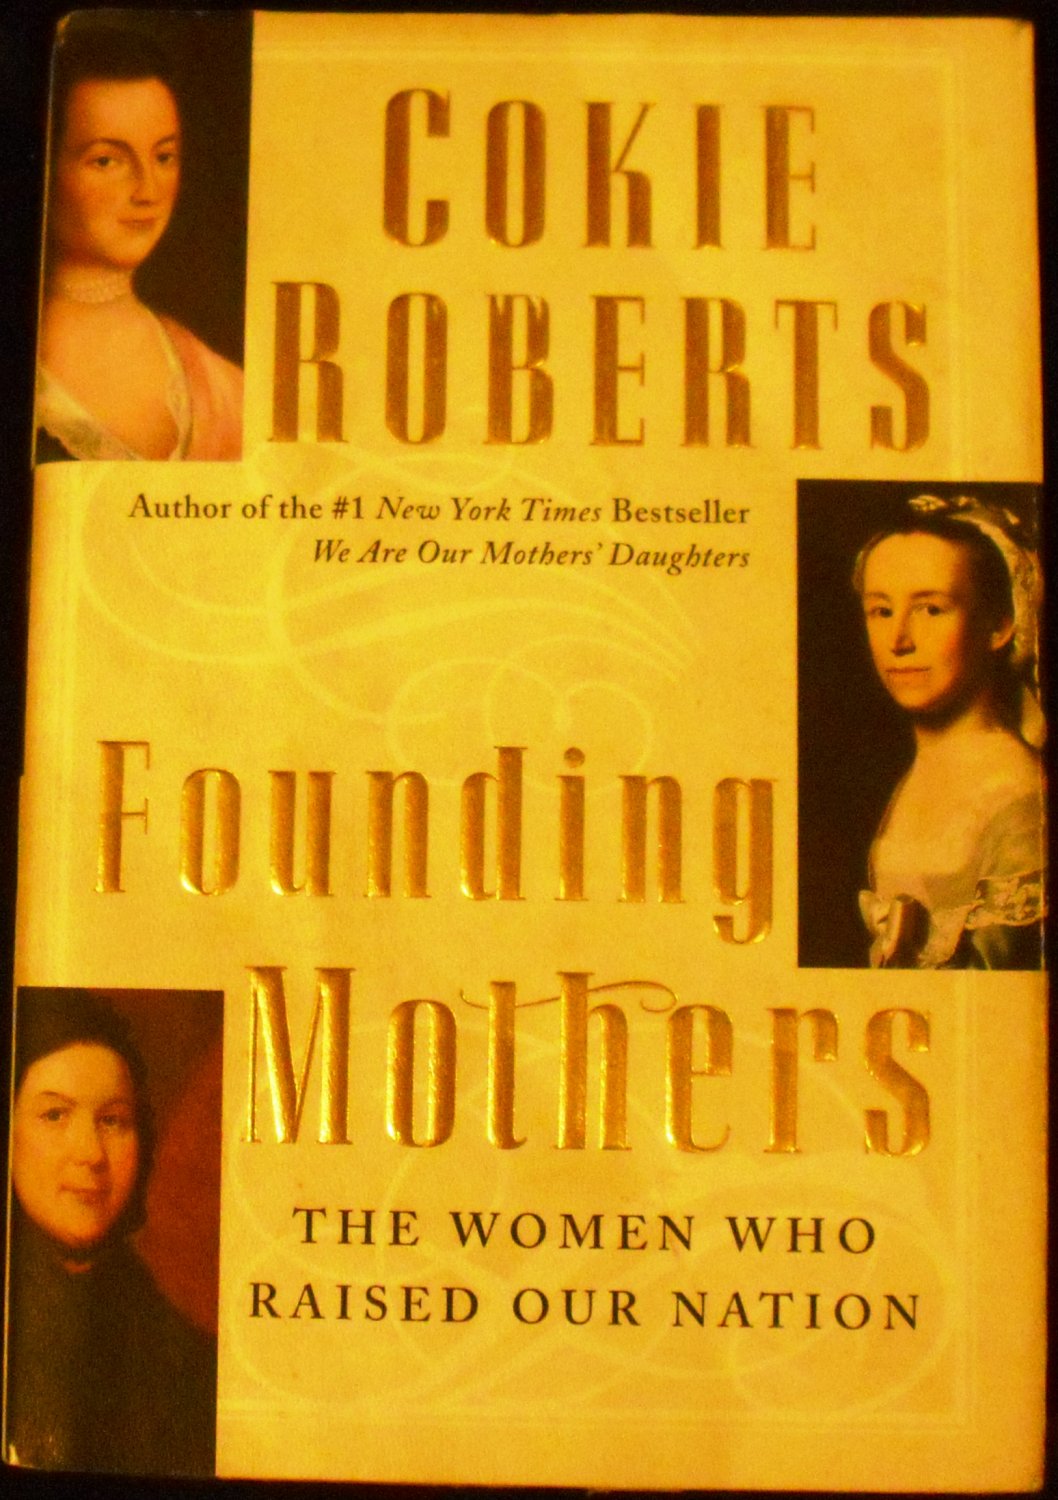 cokie roberts book founding mothers